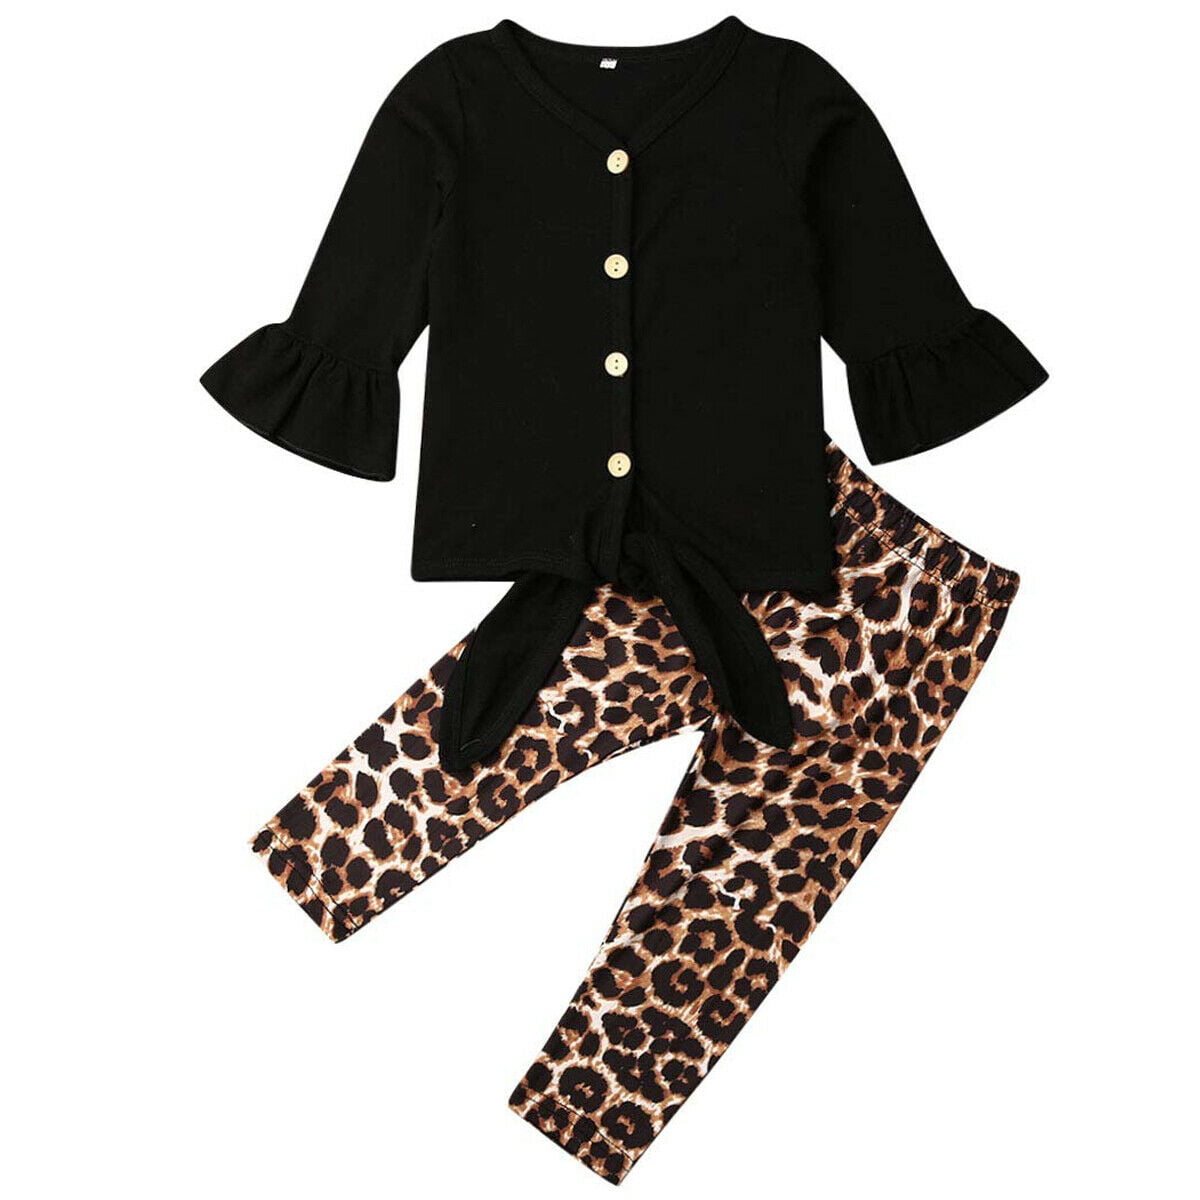 Toddler Baby Girls Autumn Leopard Outfits T-shirt+Pants Set Clothes ...